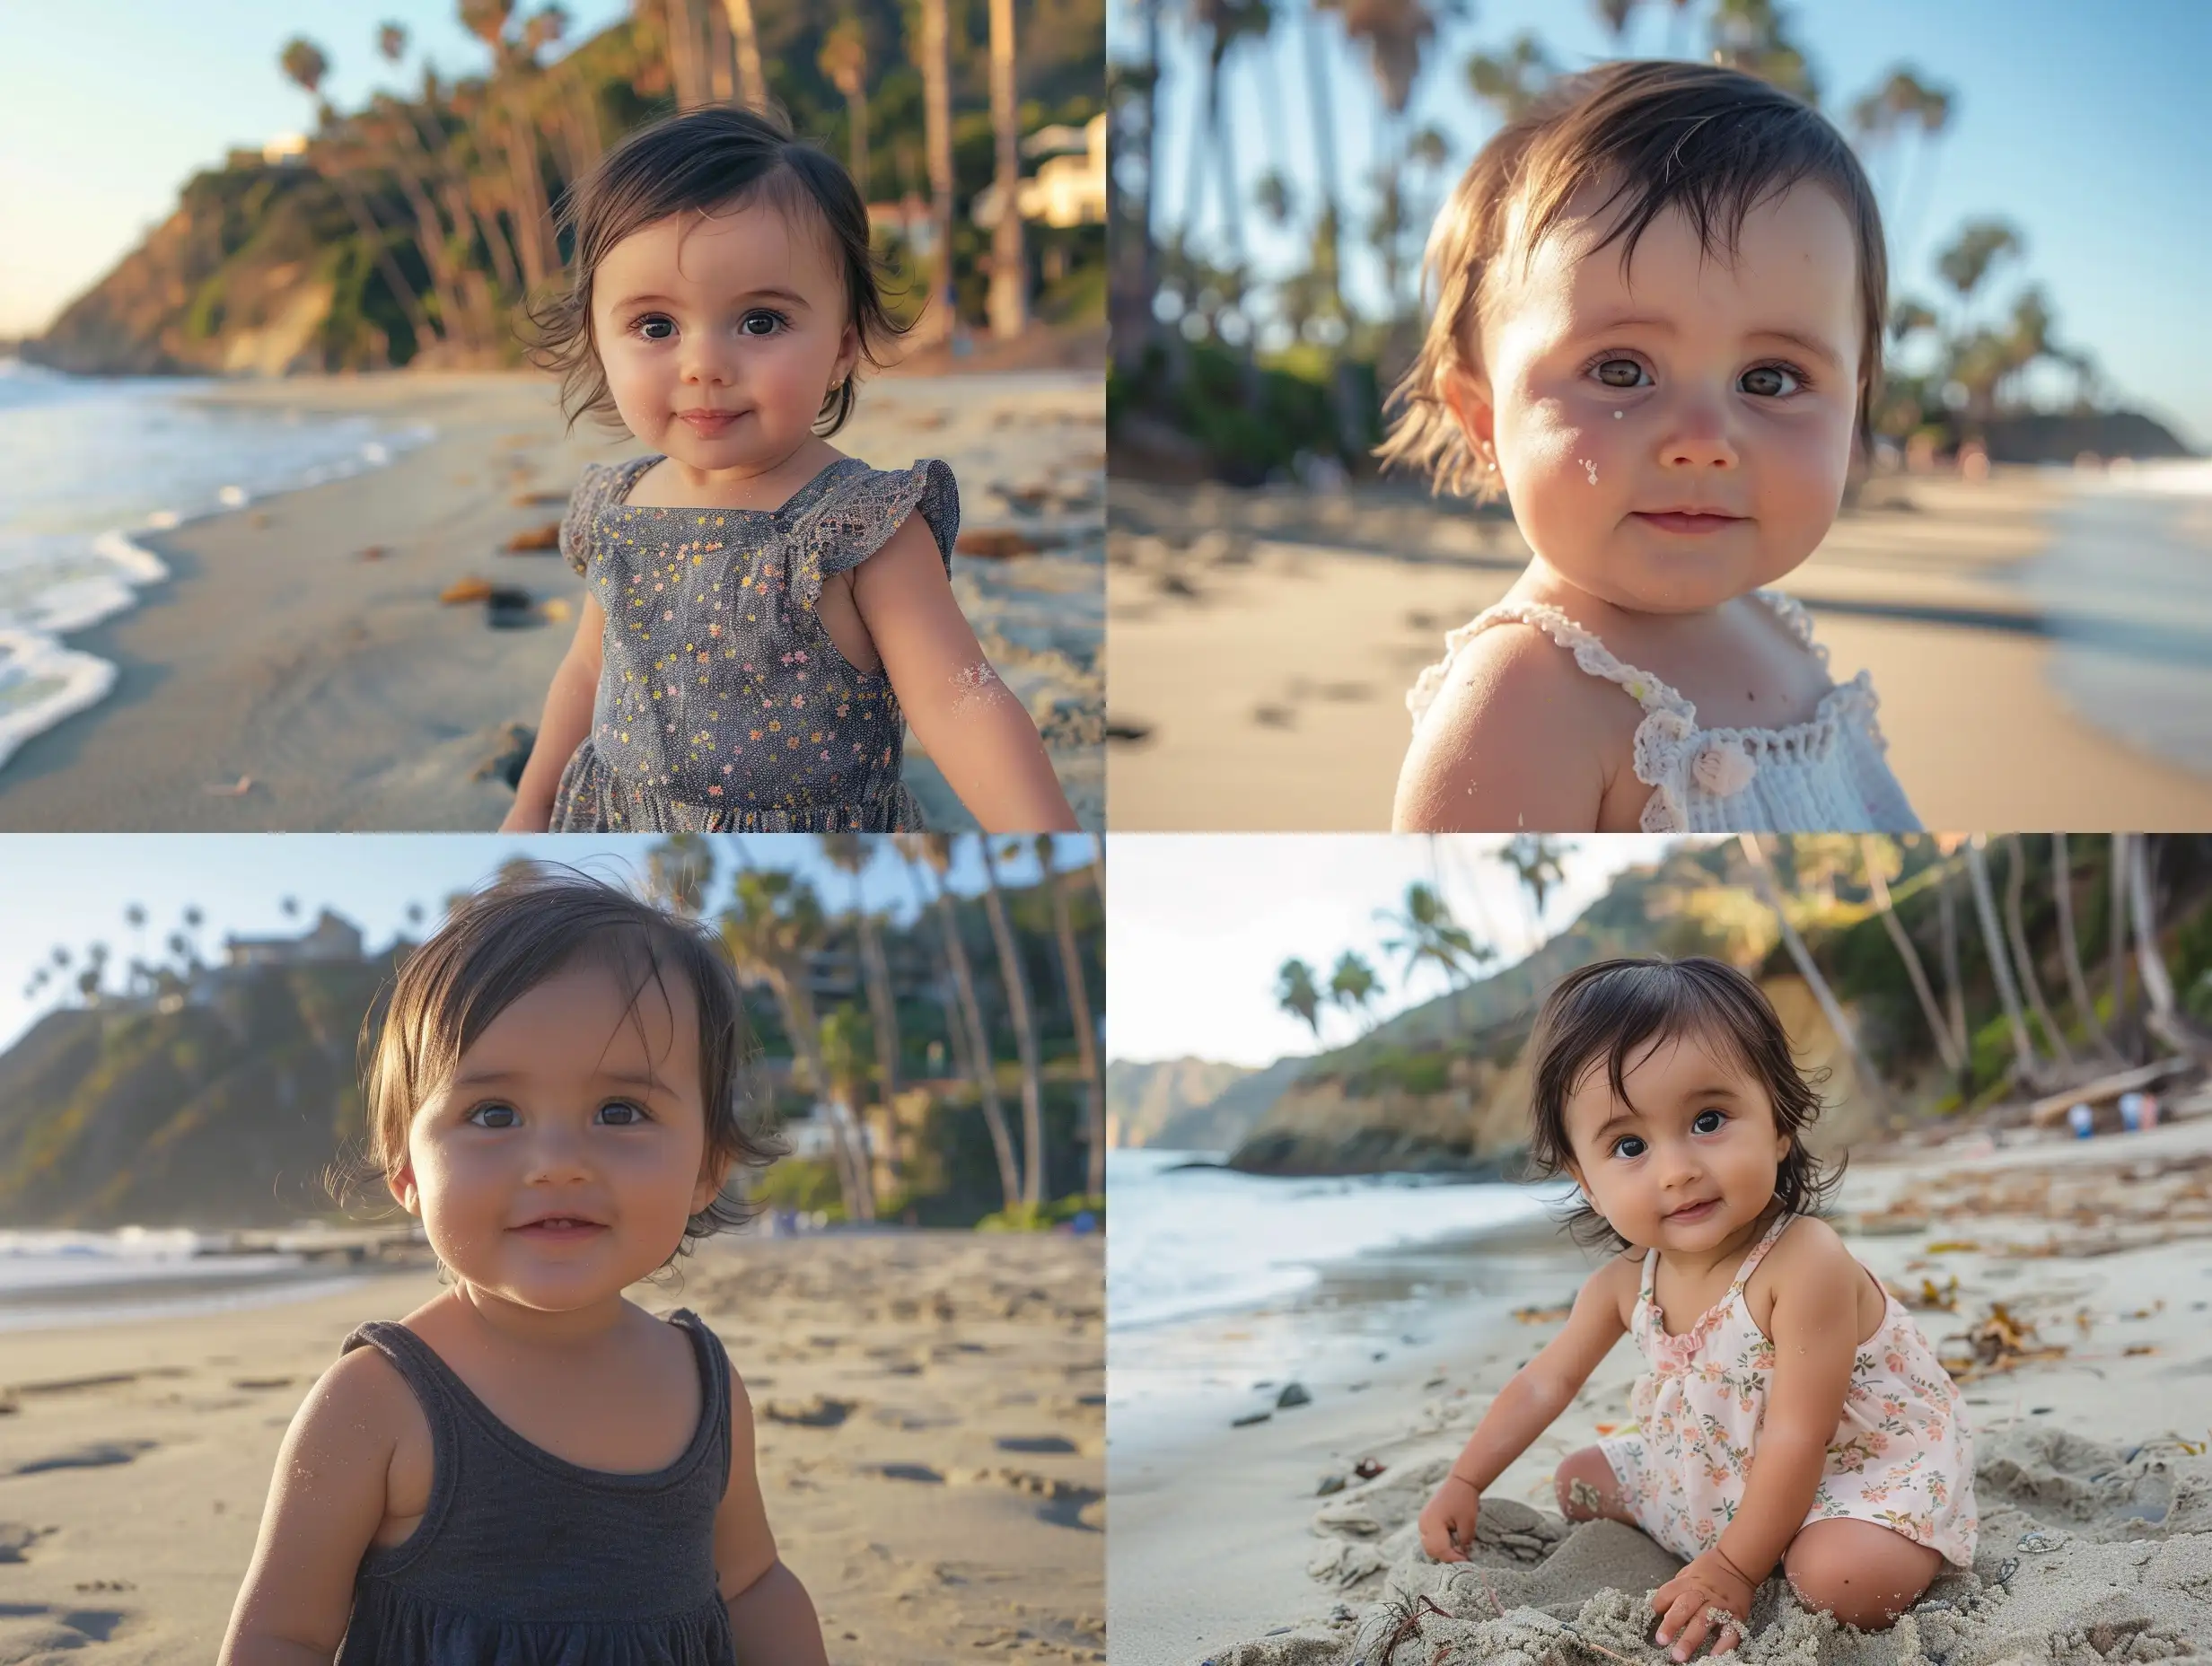 SunKissed-Baby-Girl-on-Malibu-Beaches-Realistic-Panoramic-Scene-with-Palm-Trees-and-Ocean-Waves